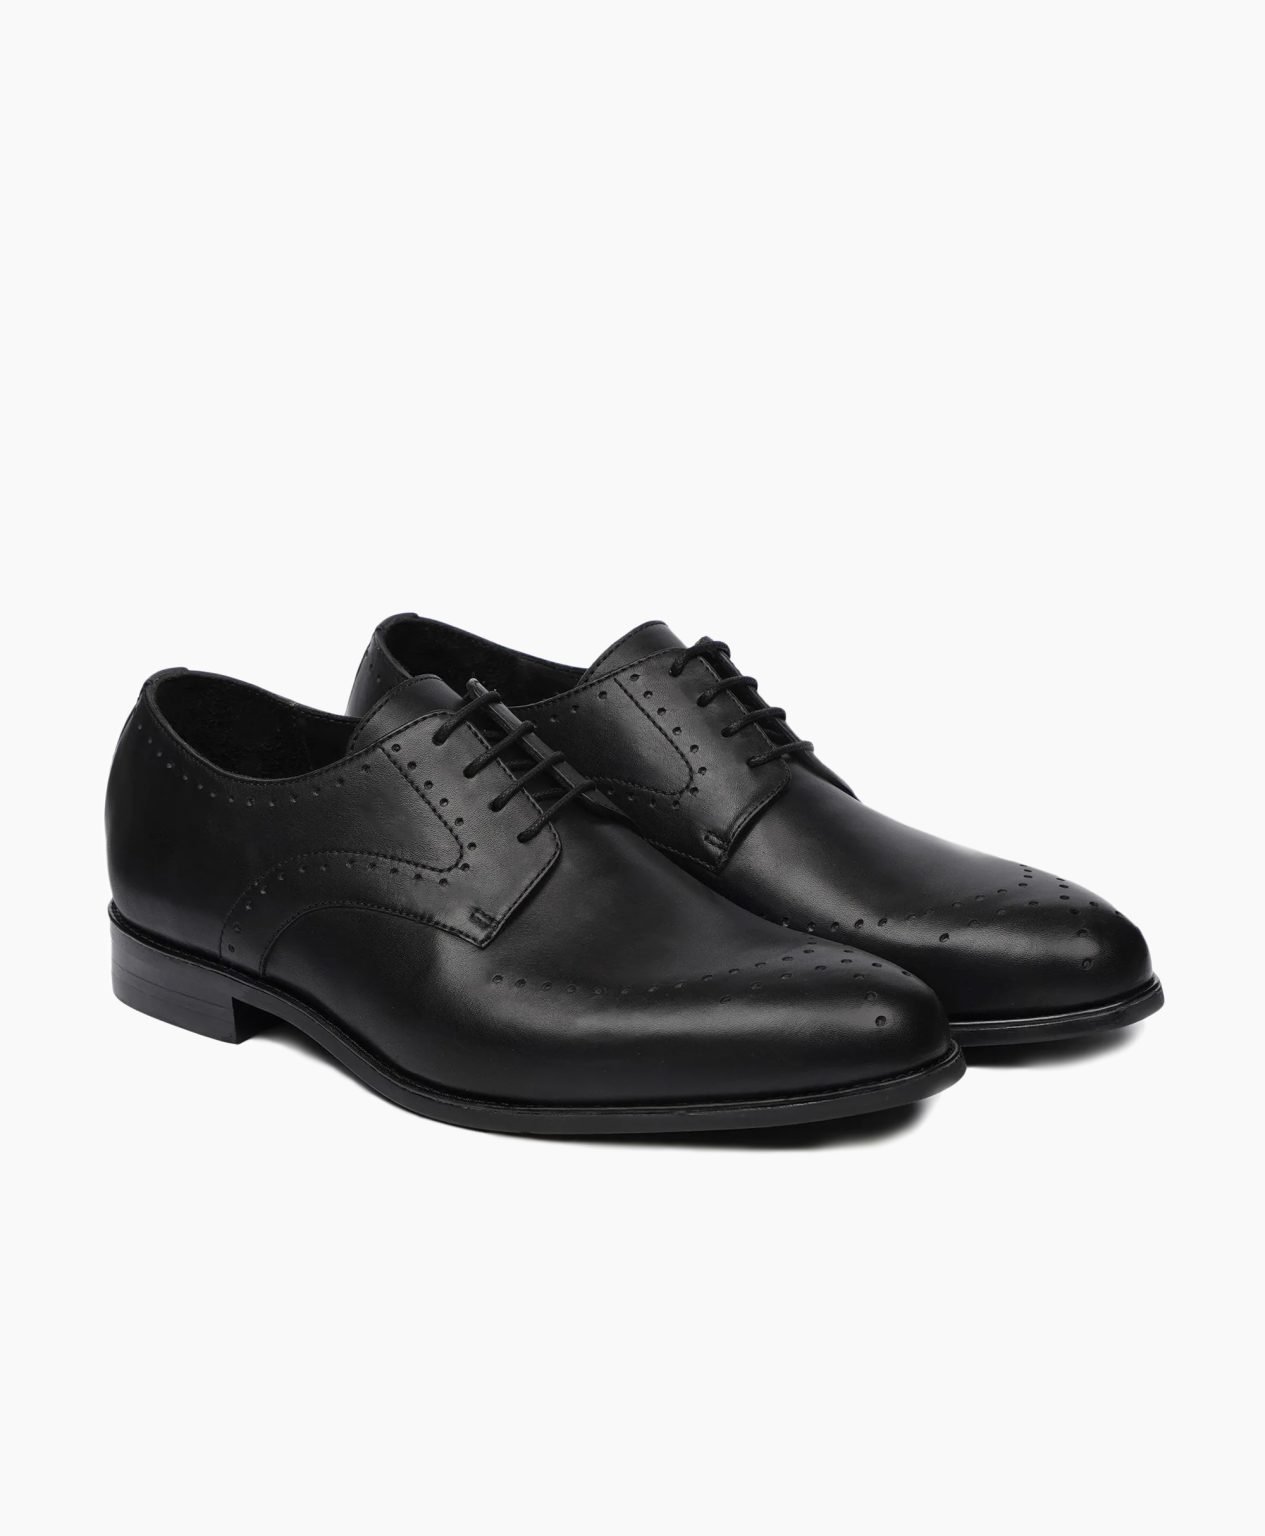 matlock-derby-black-leather-shoes-image200